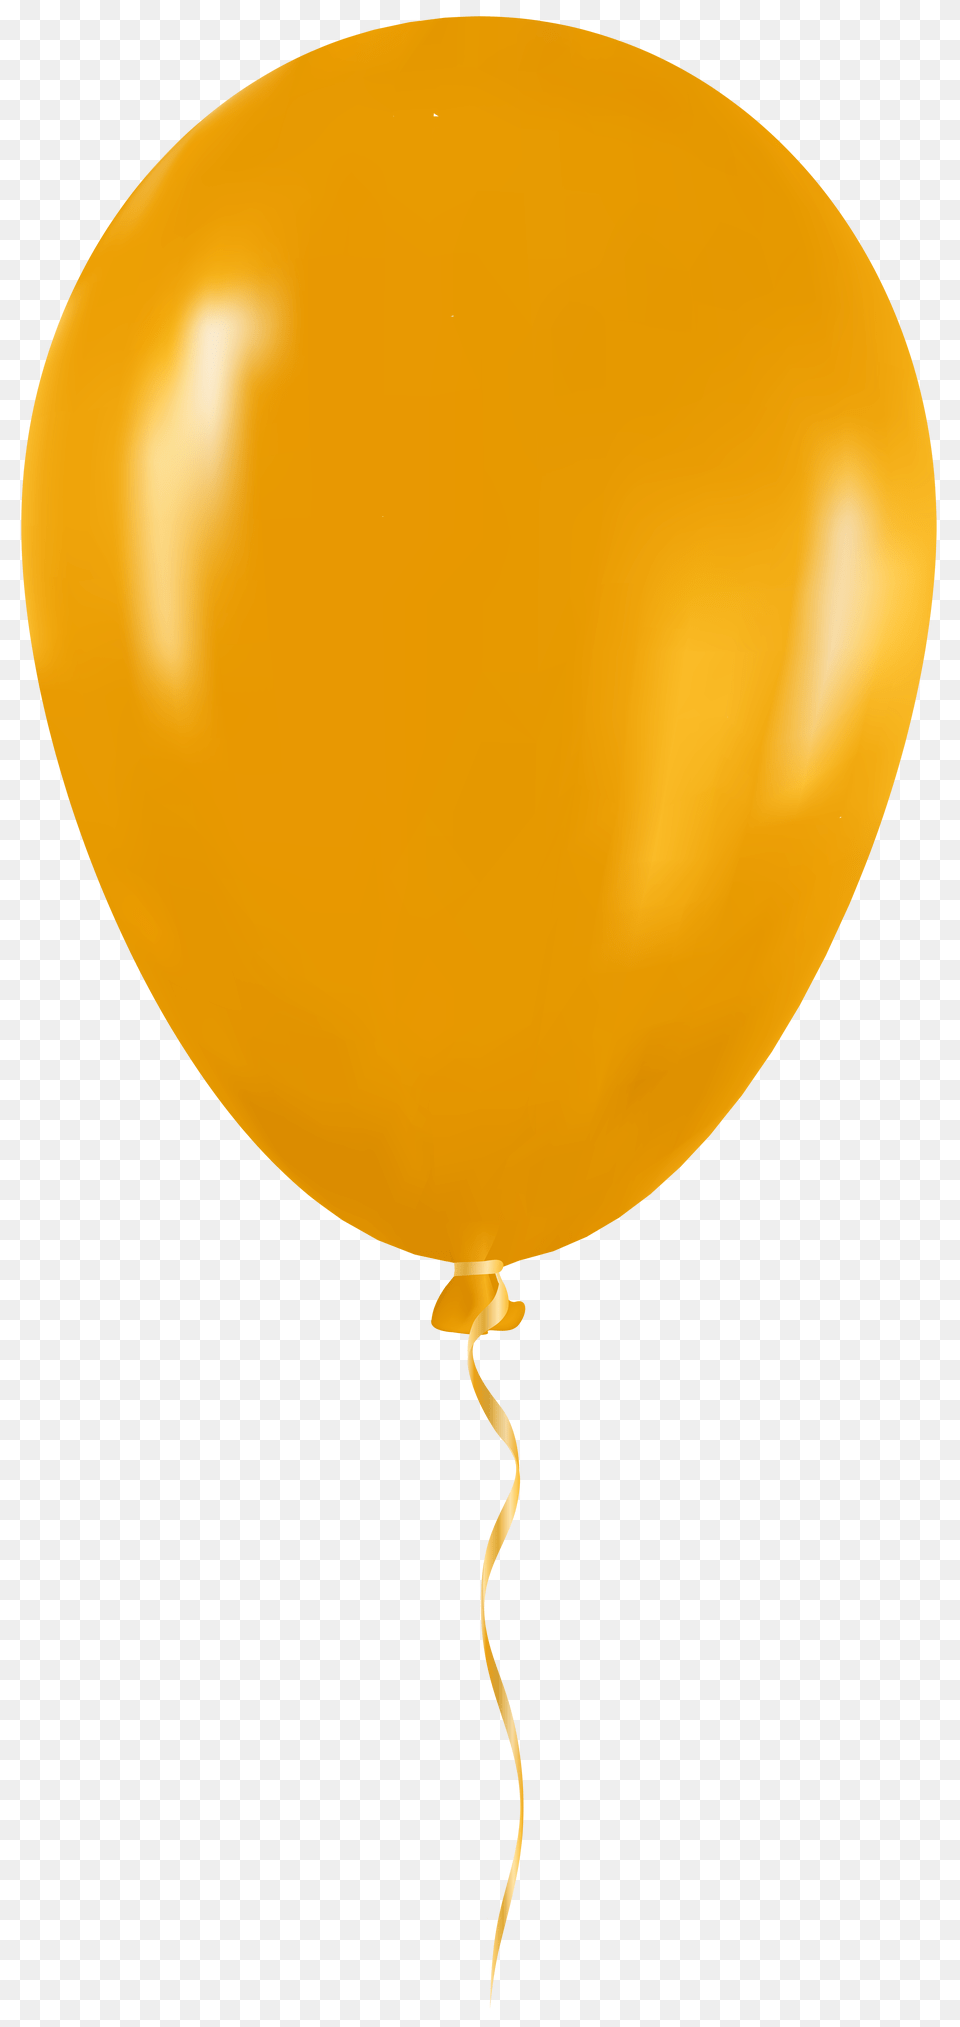 Download Yellow Balloons Balloon Images With Background Free Transparent Png